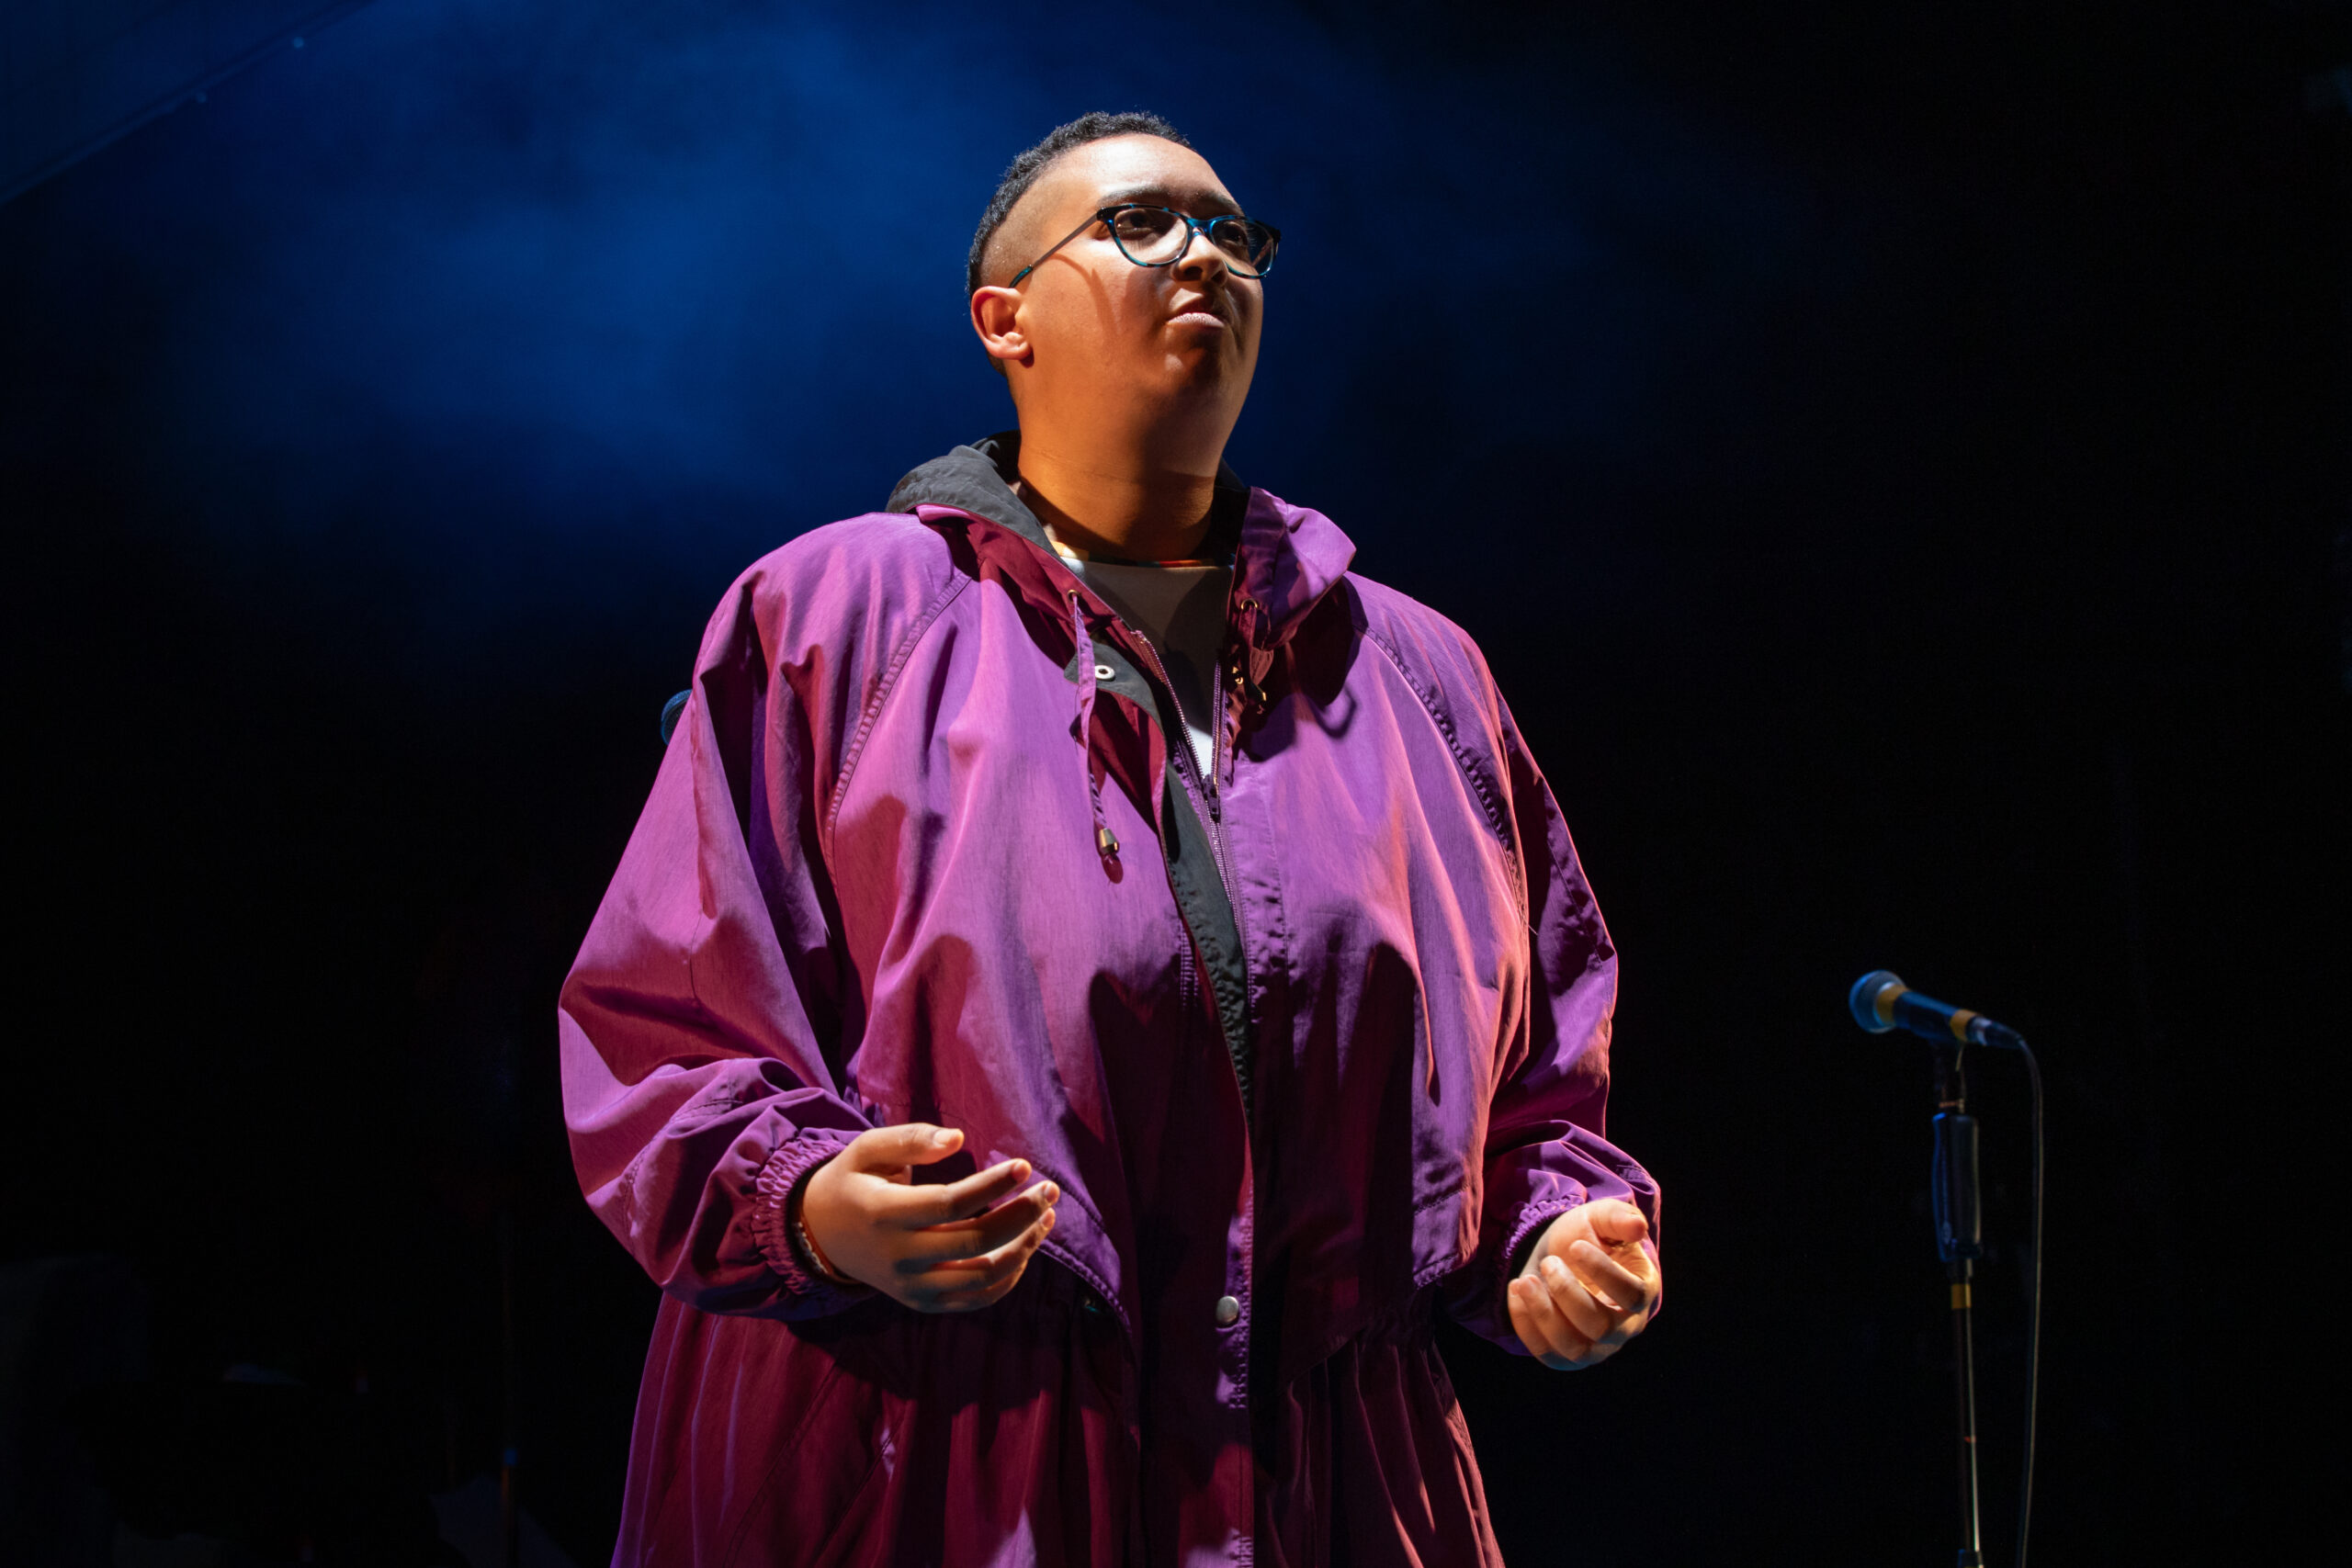 A black woman in a purple raincoat stands in a spotlight. Her hands are out in front of her, palms facing upwards. She has a serious, determined expression on her face.